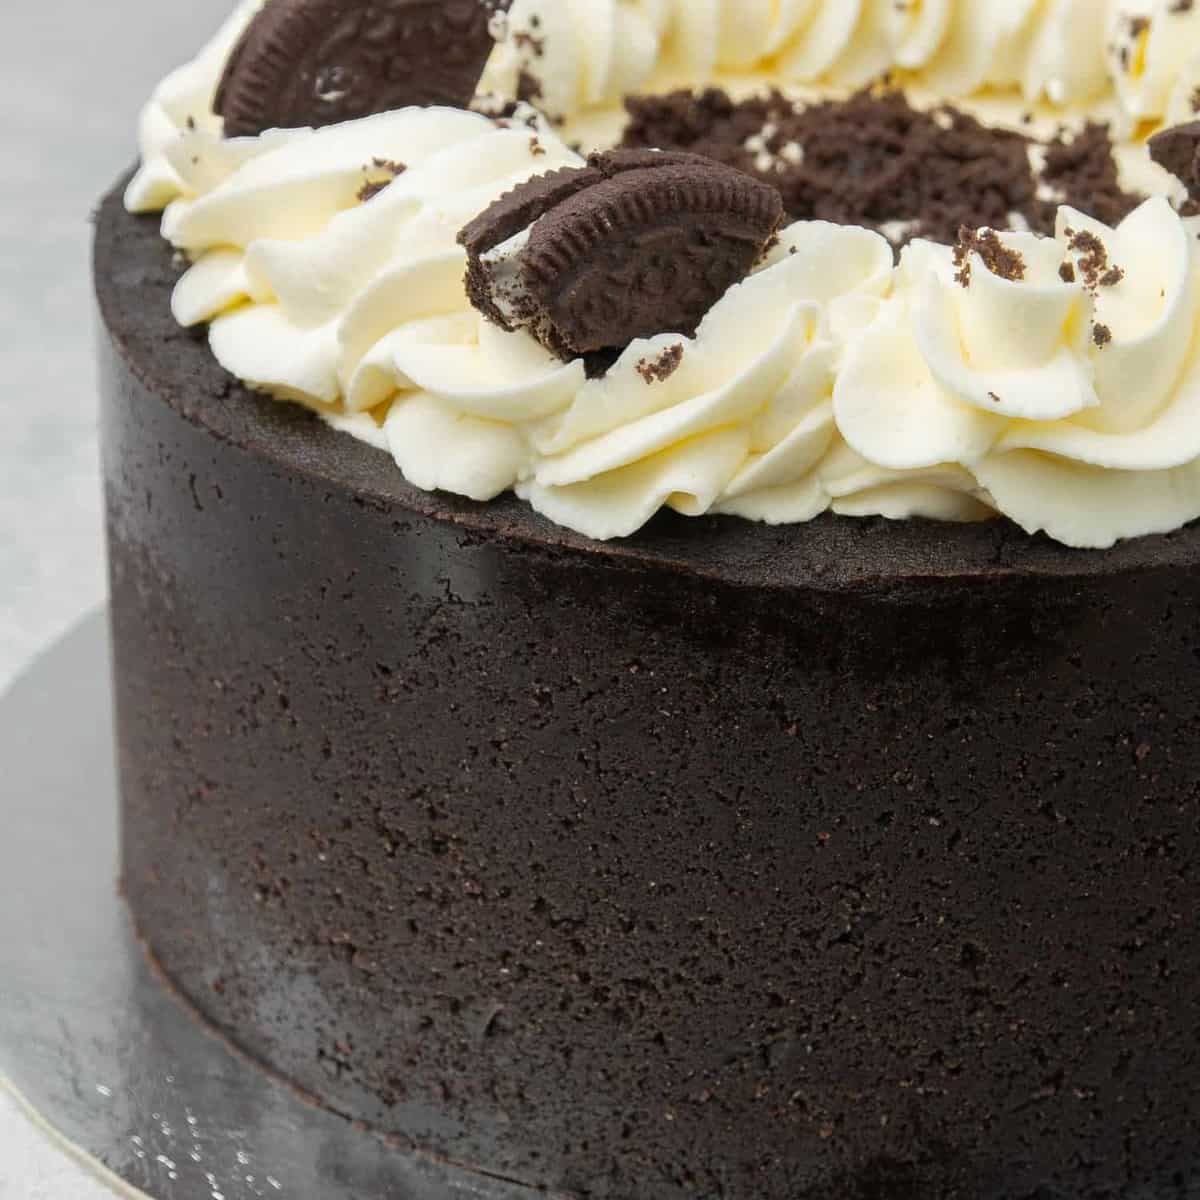 <p>This easy <a href="https://www.spatuladesserts.com/no-bake-oreo-cheesecake/">No Bake Oreo cheesecake</a> recipe is a must for Oreo and cheesecake lovers! A crunchy, decorative tall 2 ingredients Oreo crust filled with extra smooth cream cheese mousse loaded with Oreo pieces! This No-bake Oreo cheesecake is super light and taste amazing with just the right amount of sweetness!</p> <p><strong>Go to the recipe: <a href="https://www.spatuladesserts.com/no-bake-oreo-cheesecake/">No Bake Oreo Cheesecake</a></strong></p>